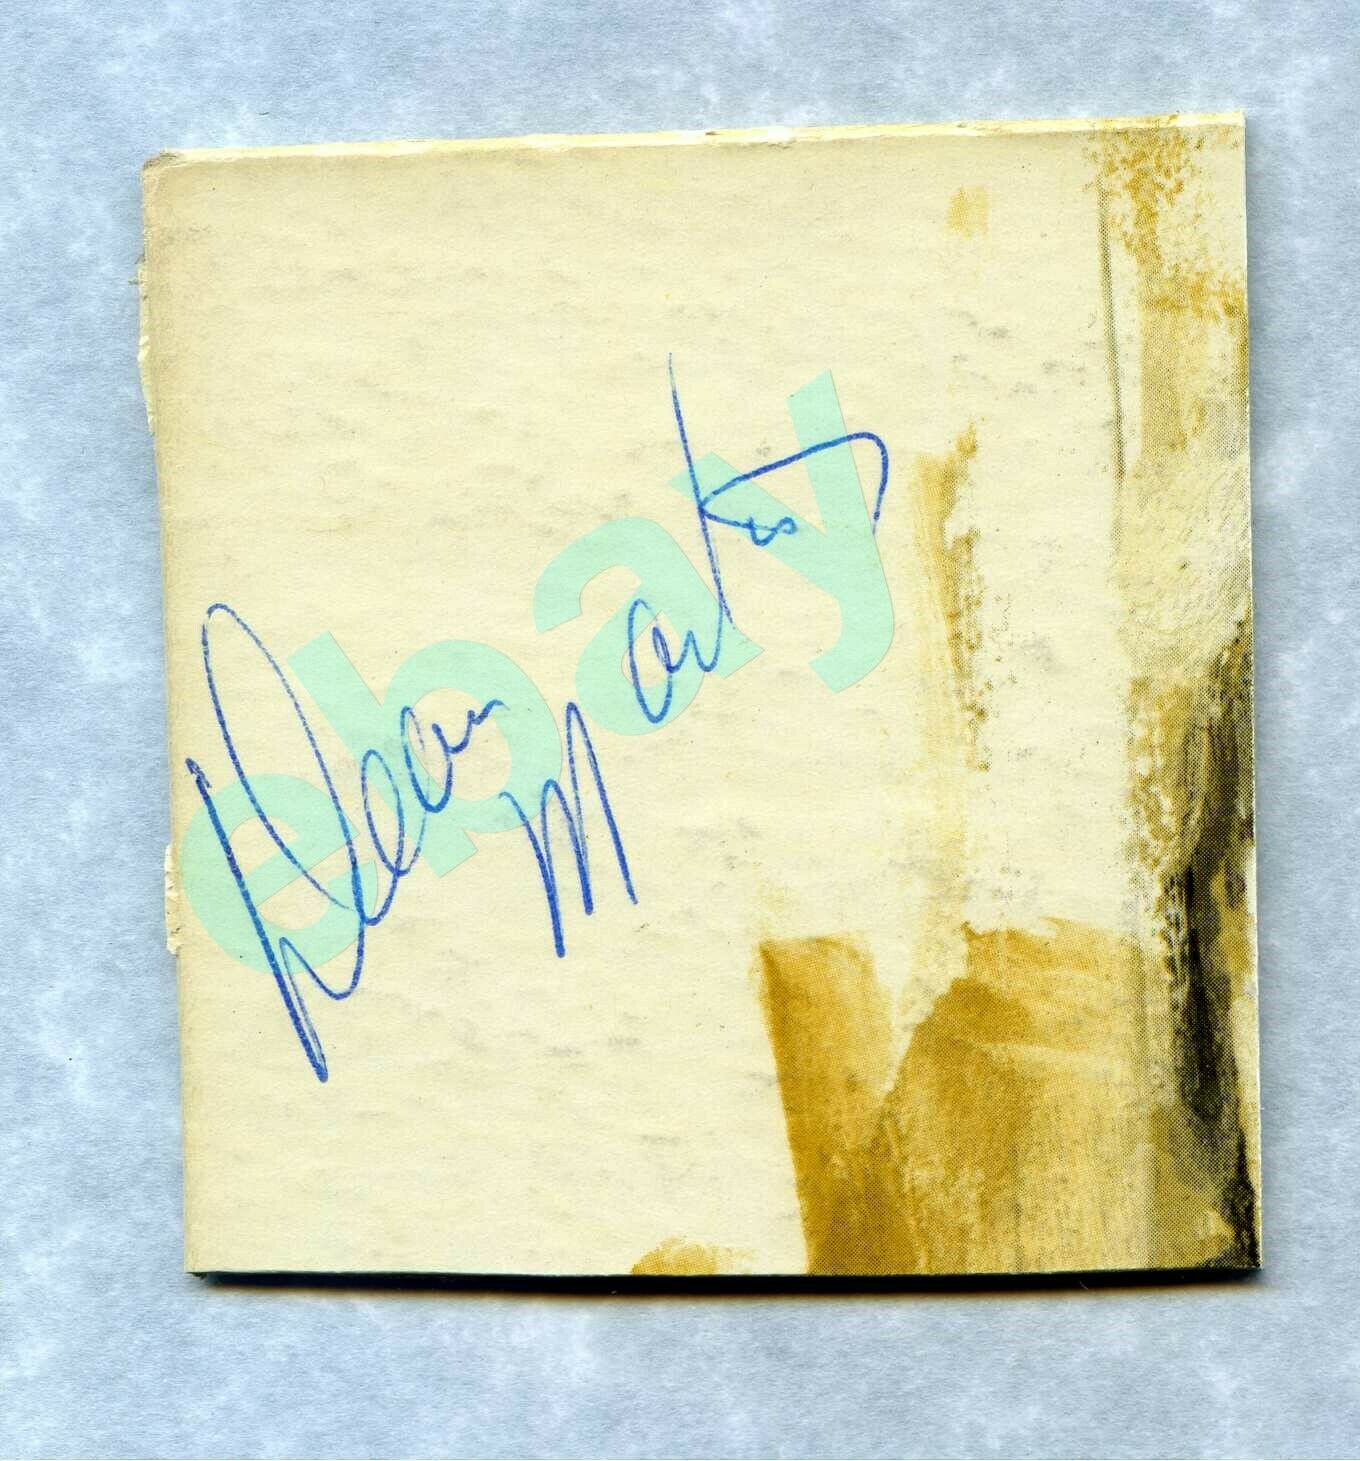 Dean Martin Signed Autographed Cut Signature Early Circa 1960s Rat Pack Sinatra